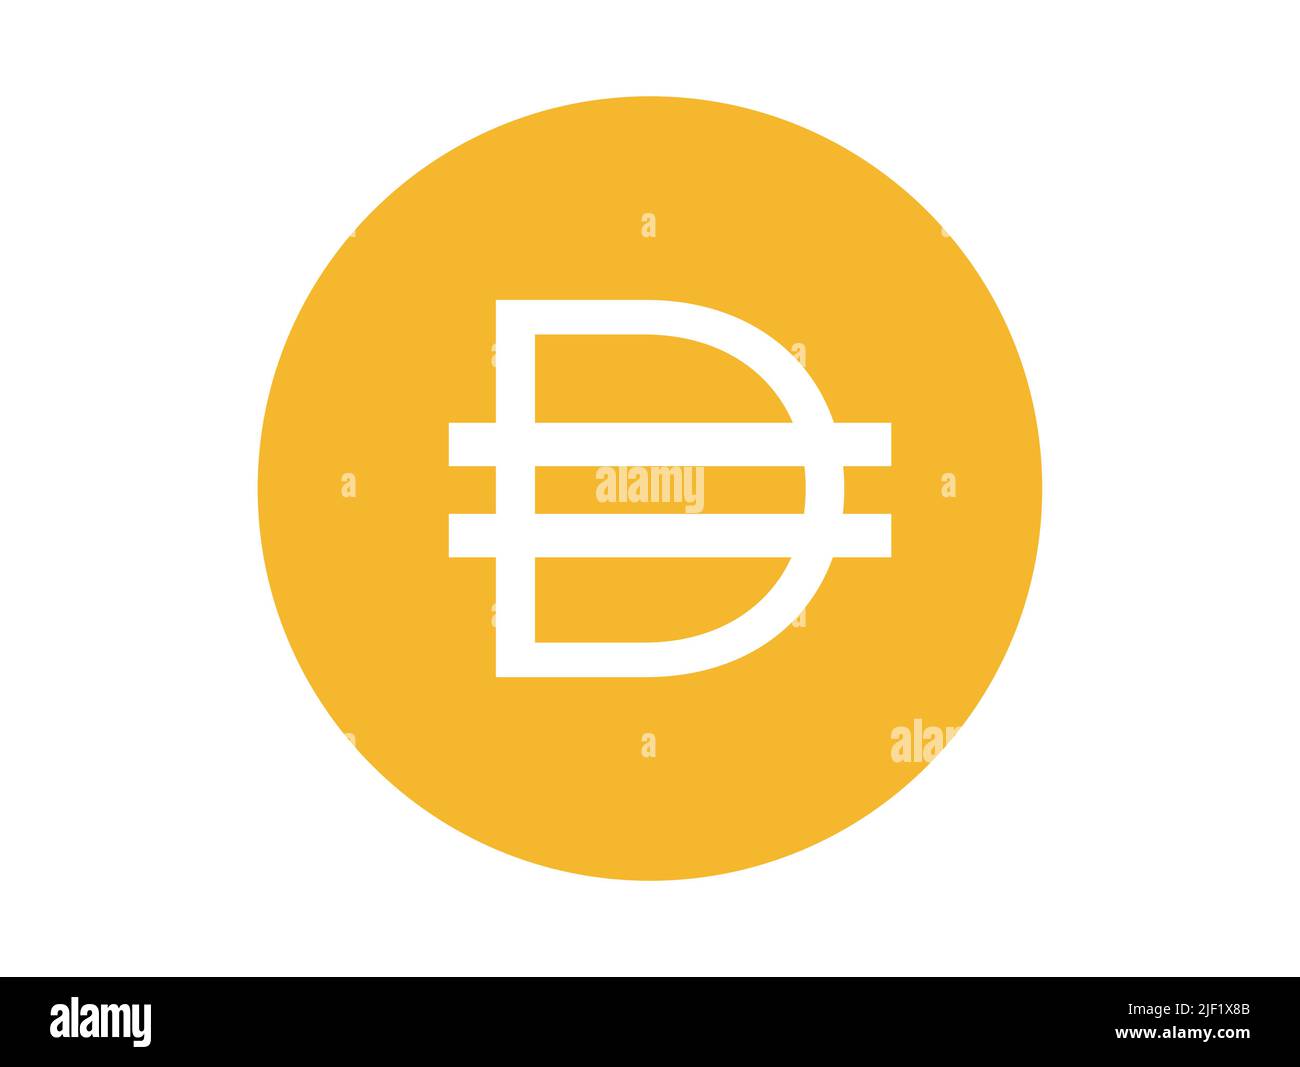 DAI currency Icon. Flat design. Concept of crypto currency and blockchain. Stock Vector